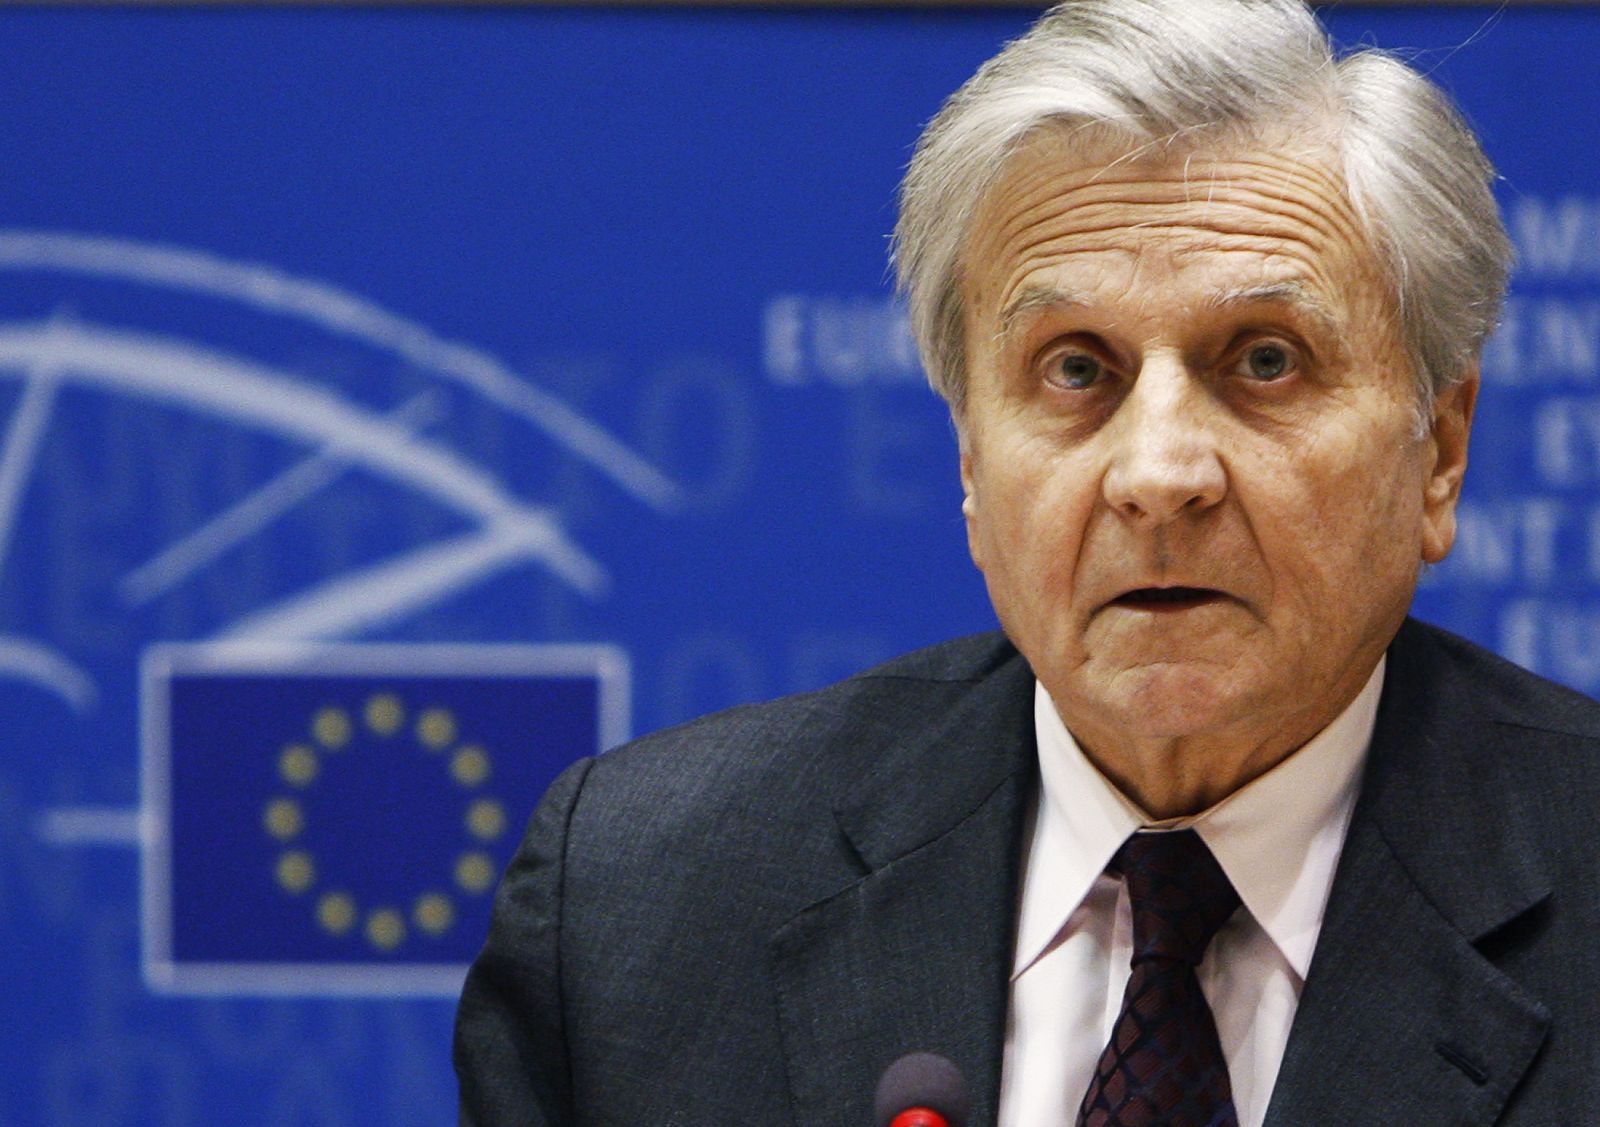 ECB President Trichet speaks to the EU Parliament's monetary affairs committee in Brussels